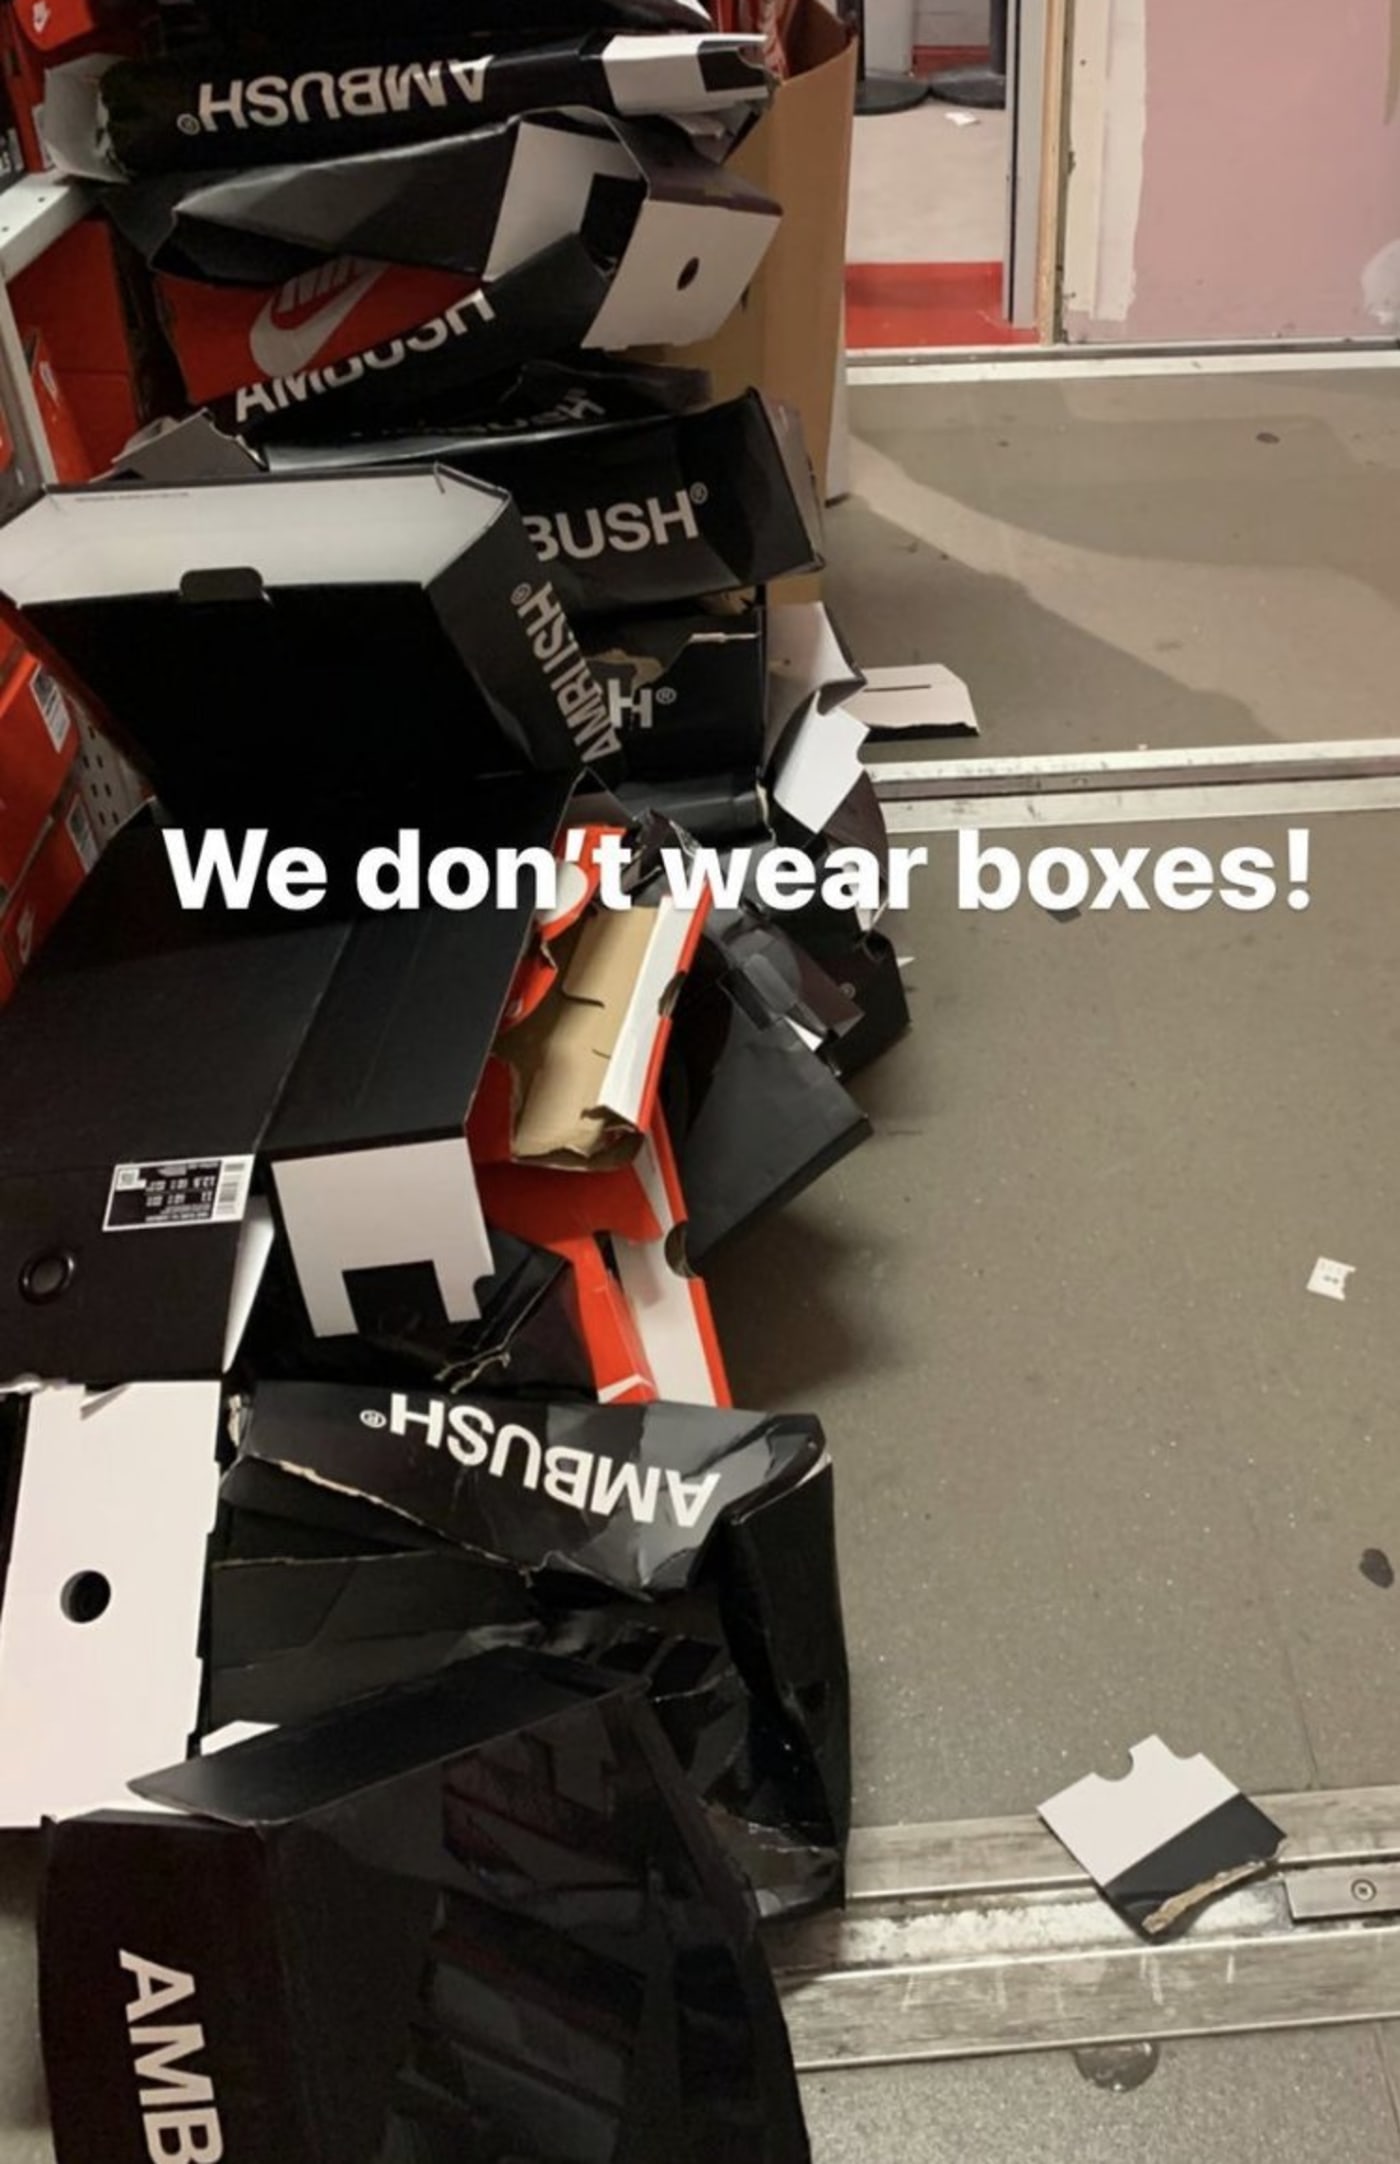 Offspring Sneaker Store Destroys Boxes